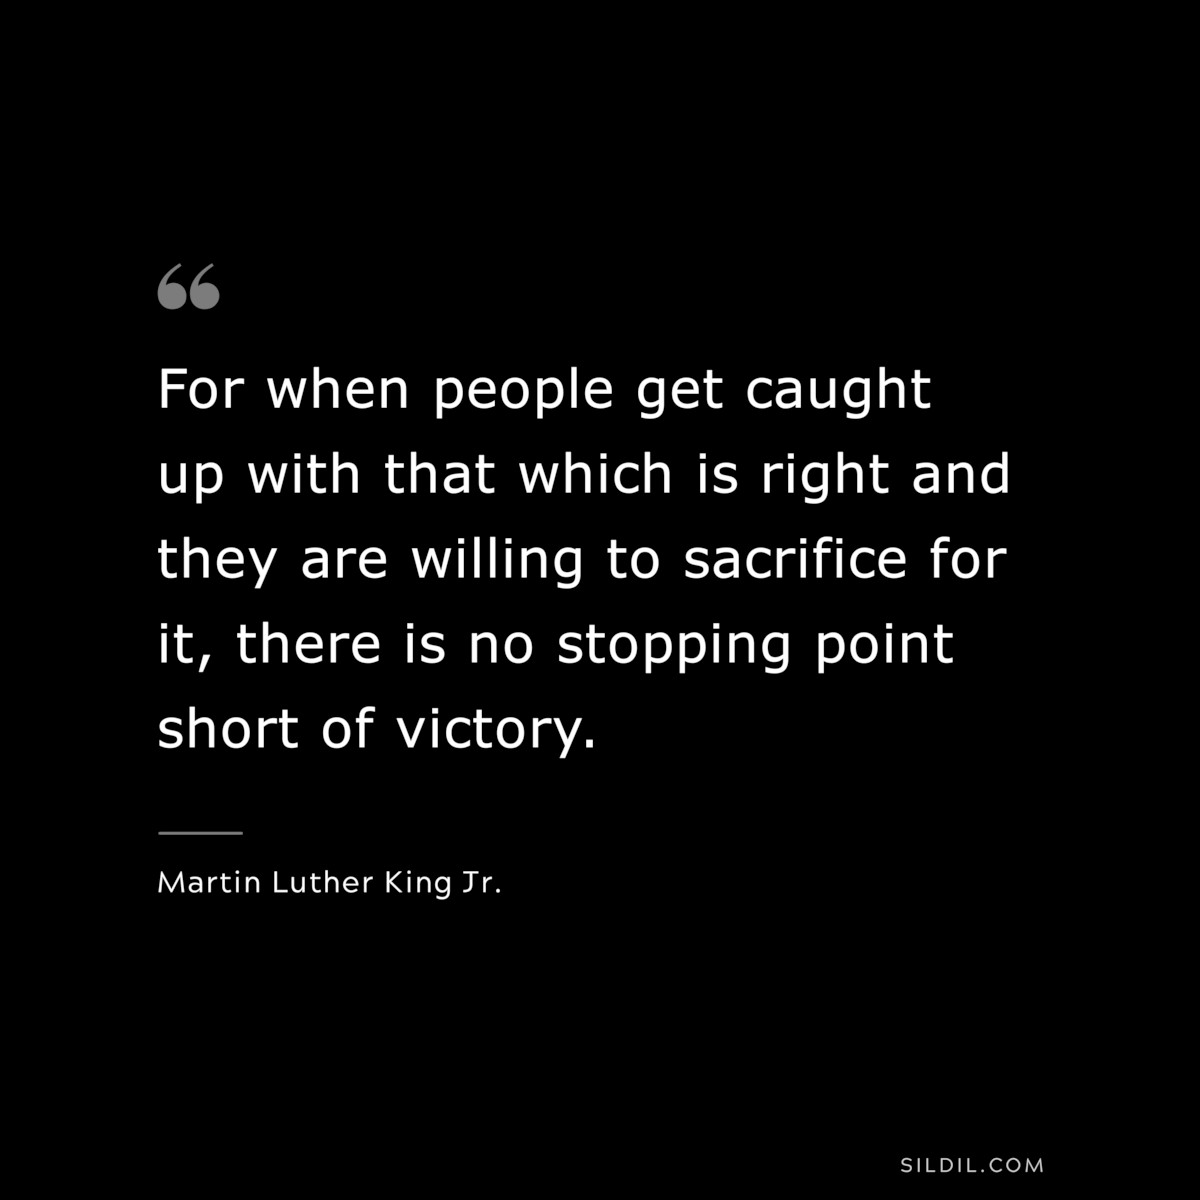 For when people get caught up with that which is right and they are willing to sacrifice for it, there is no stopping point short of victory. ― Martin Luther King Jr.